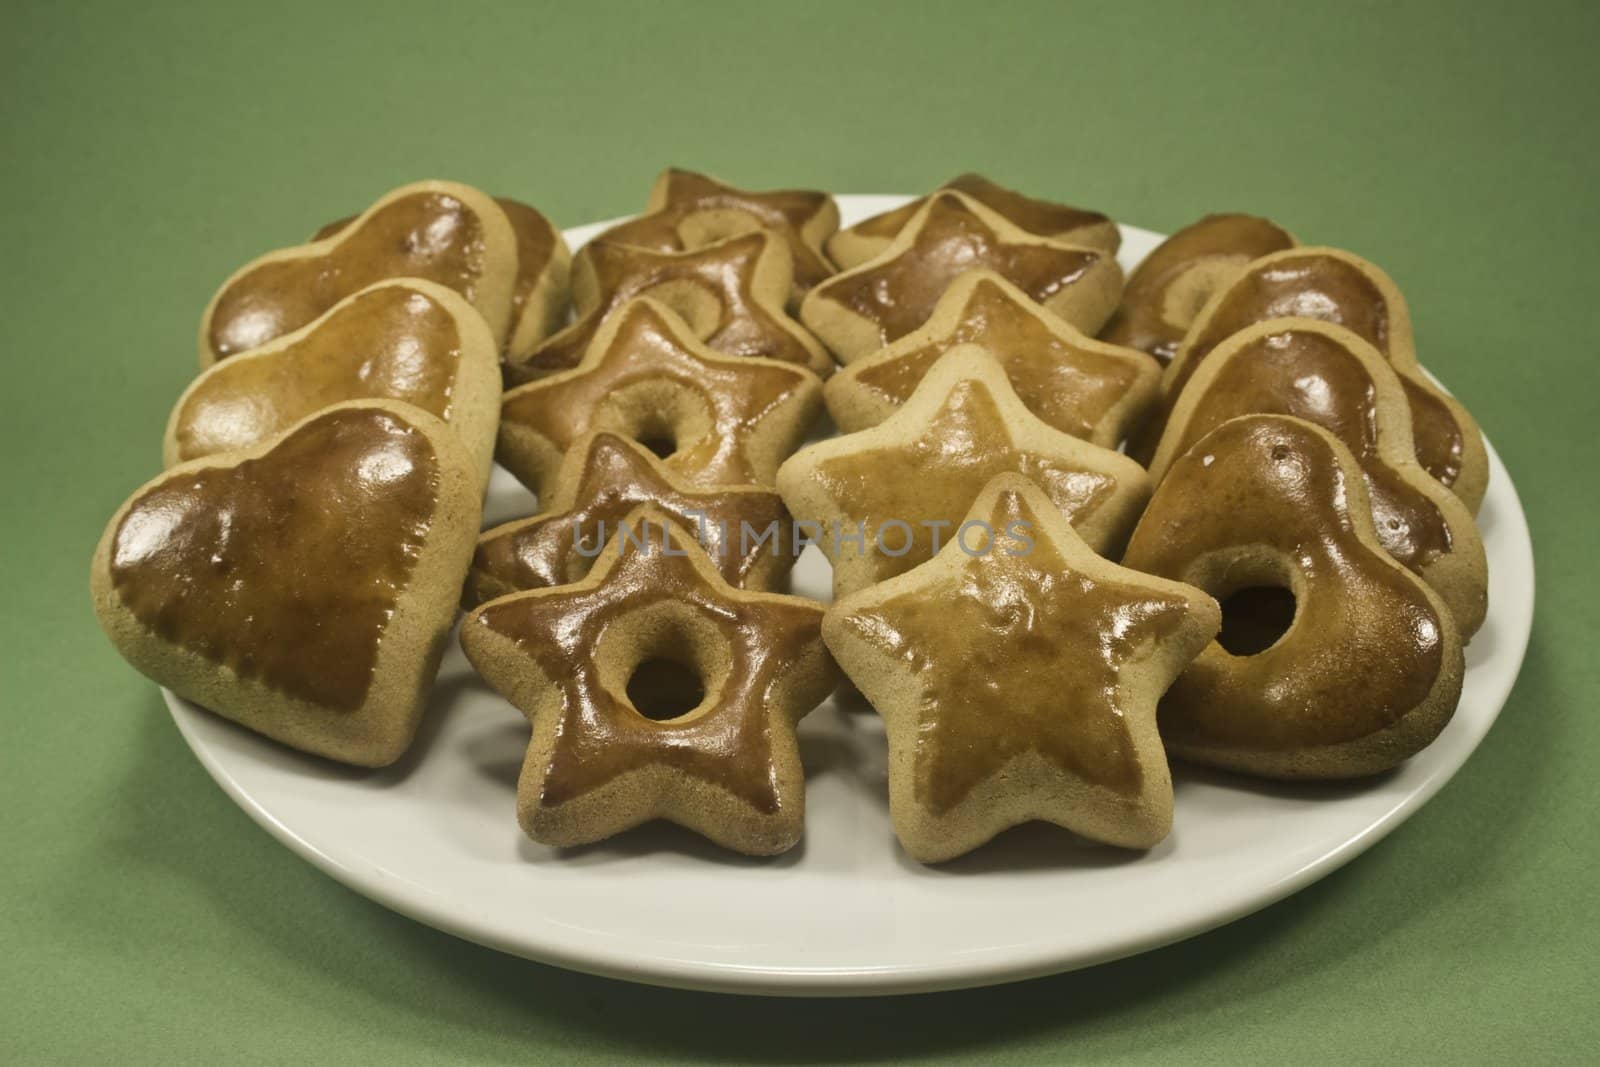 Star and heart gingerbread cookies on white plate isolated on green paper